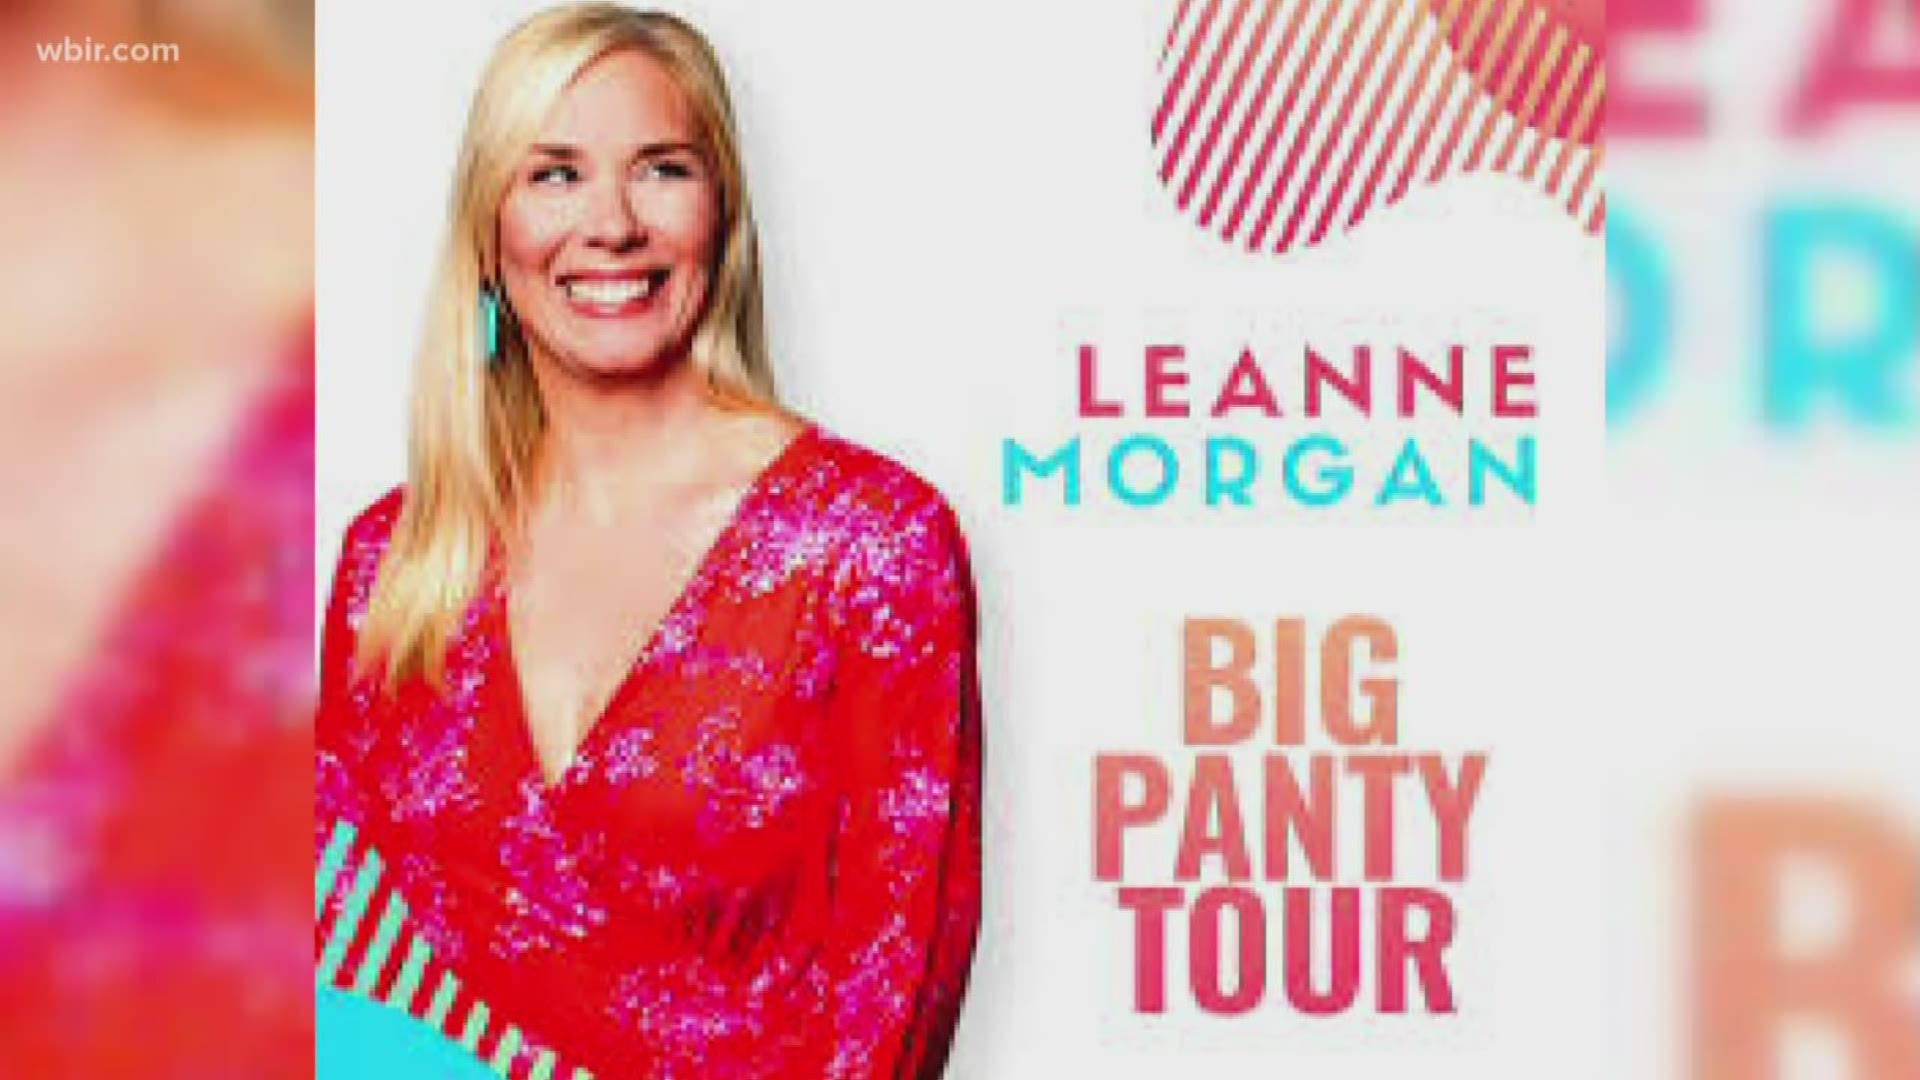 10News anchor Russel Biven checks in with Leanne Morgan, who's planning her "Big Panty" comedy tour.